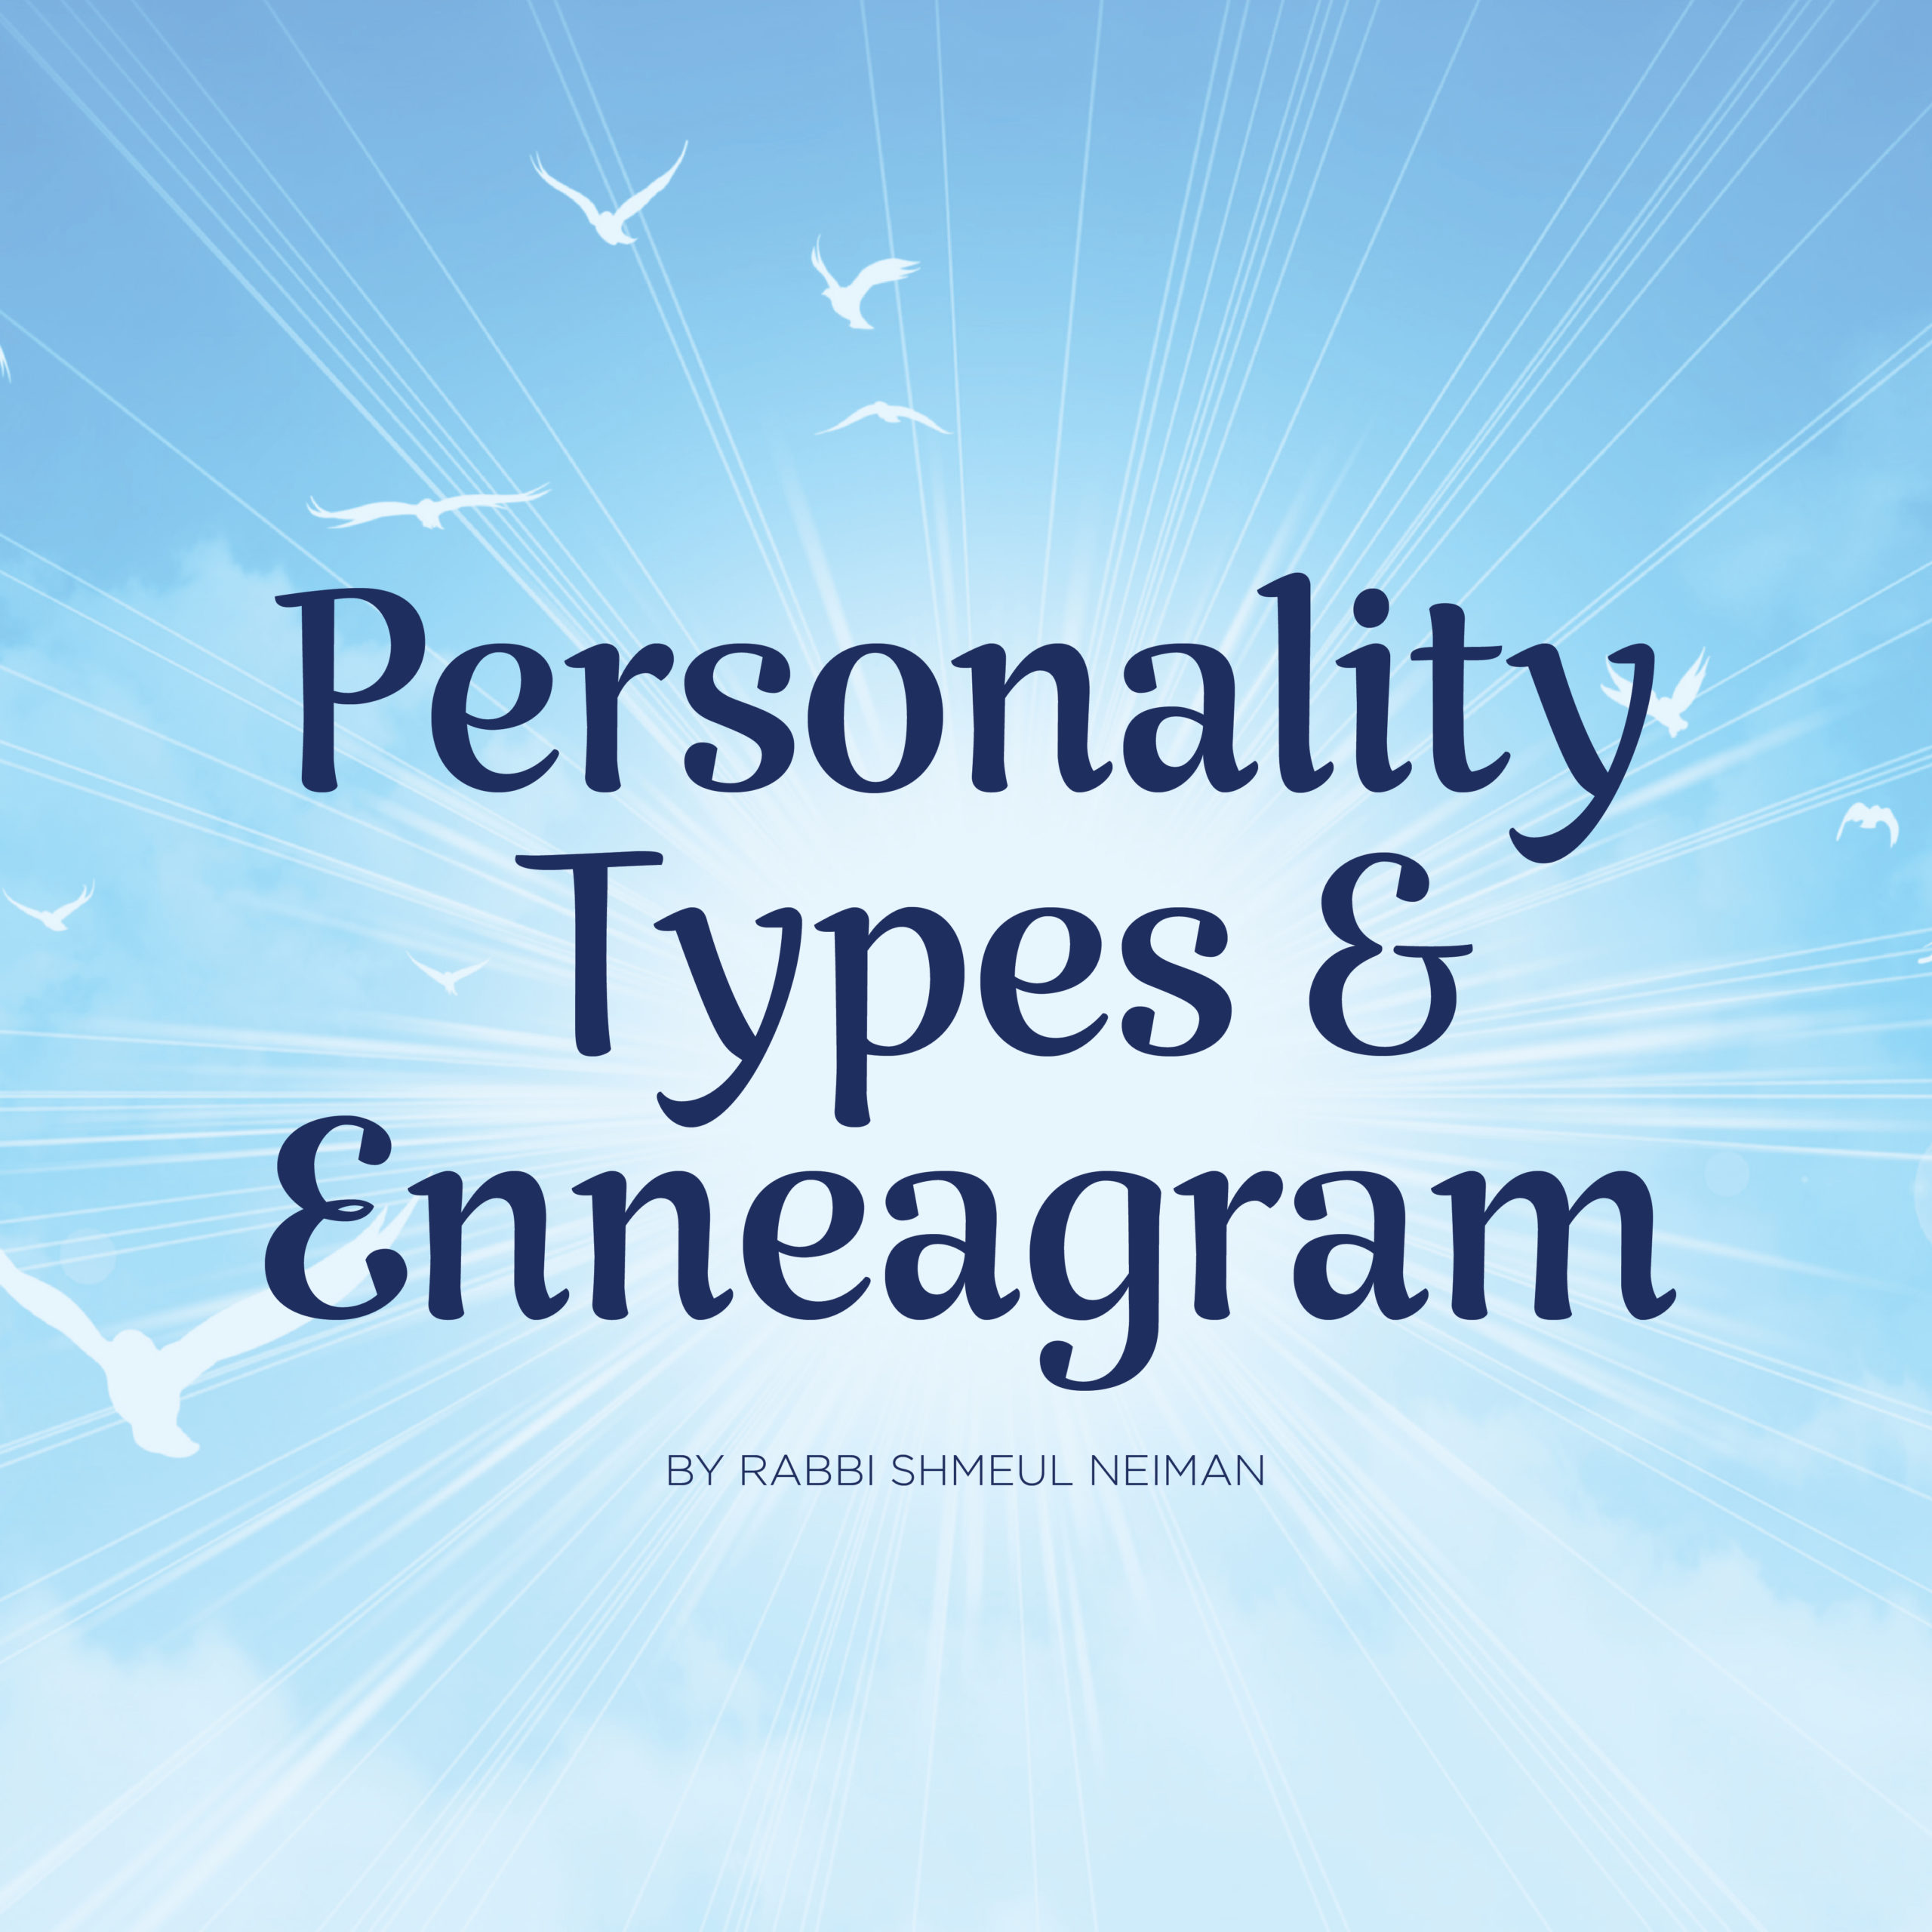 Personality Types & Enneagram